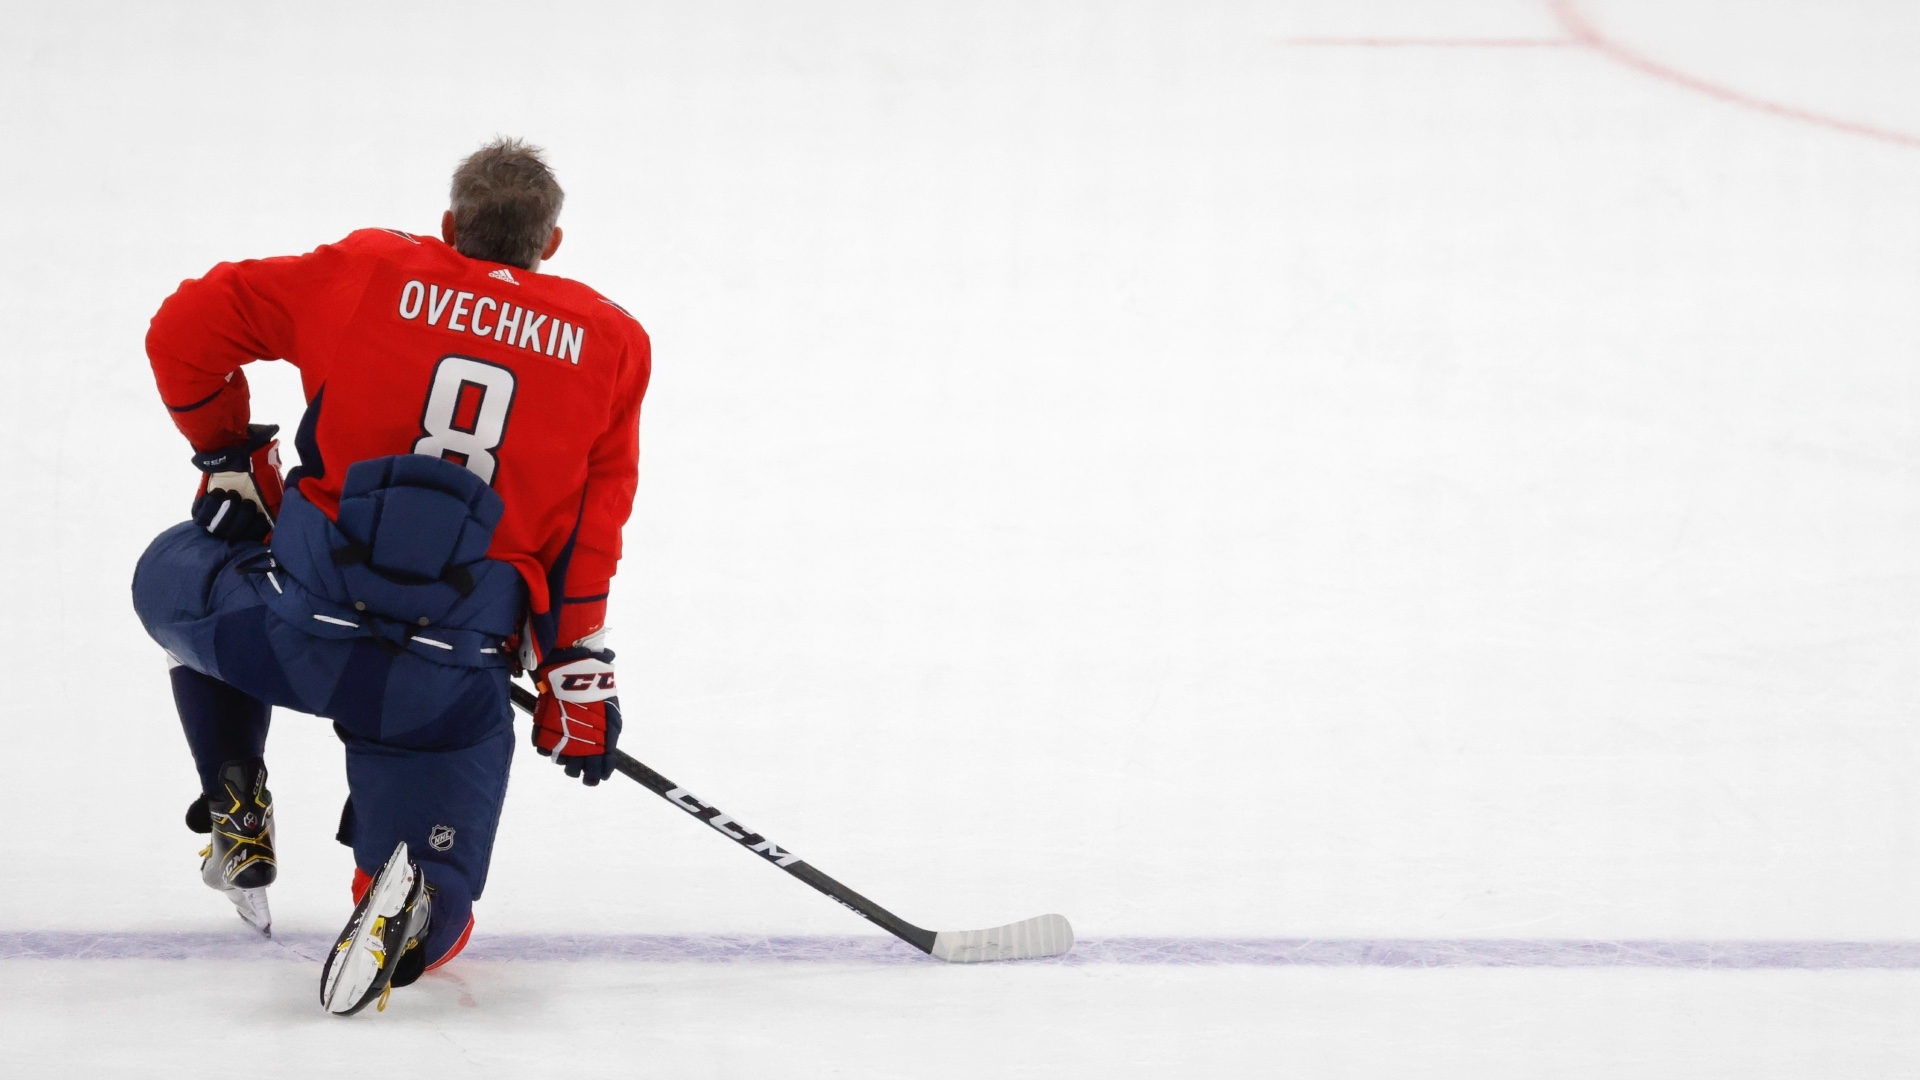 Ovechkin ties one record, moves closer to Gretzky's mark – The Morning Call